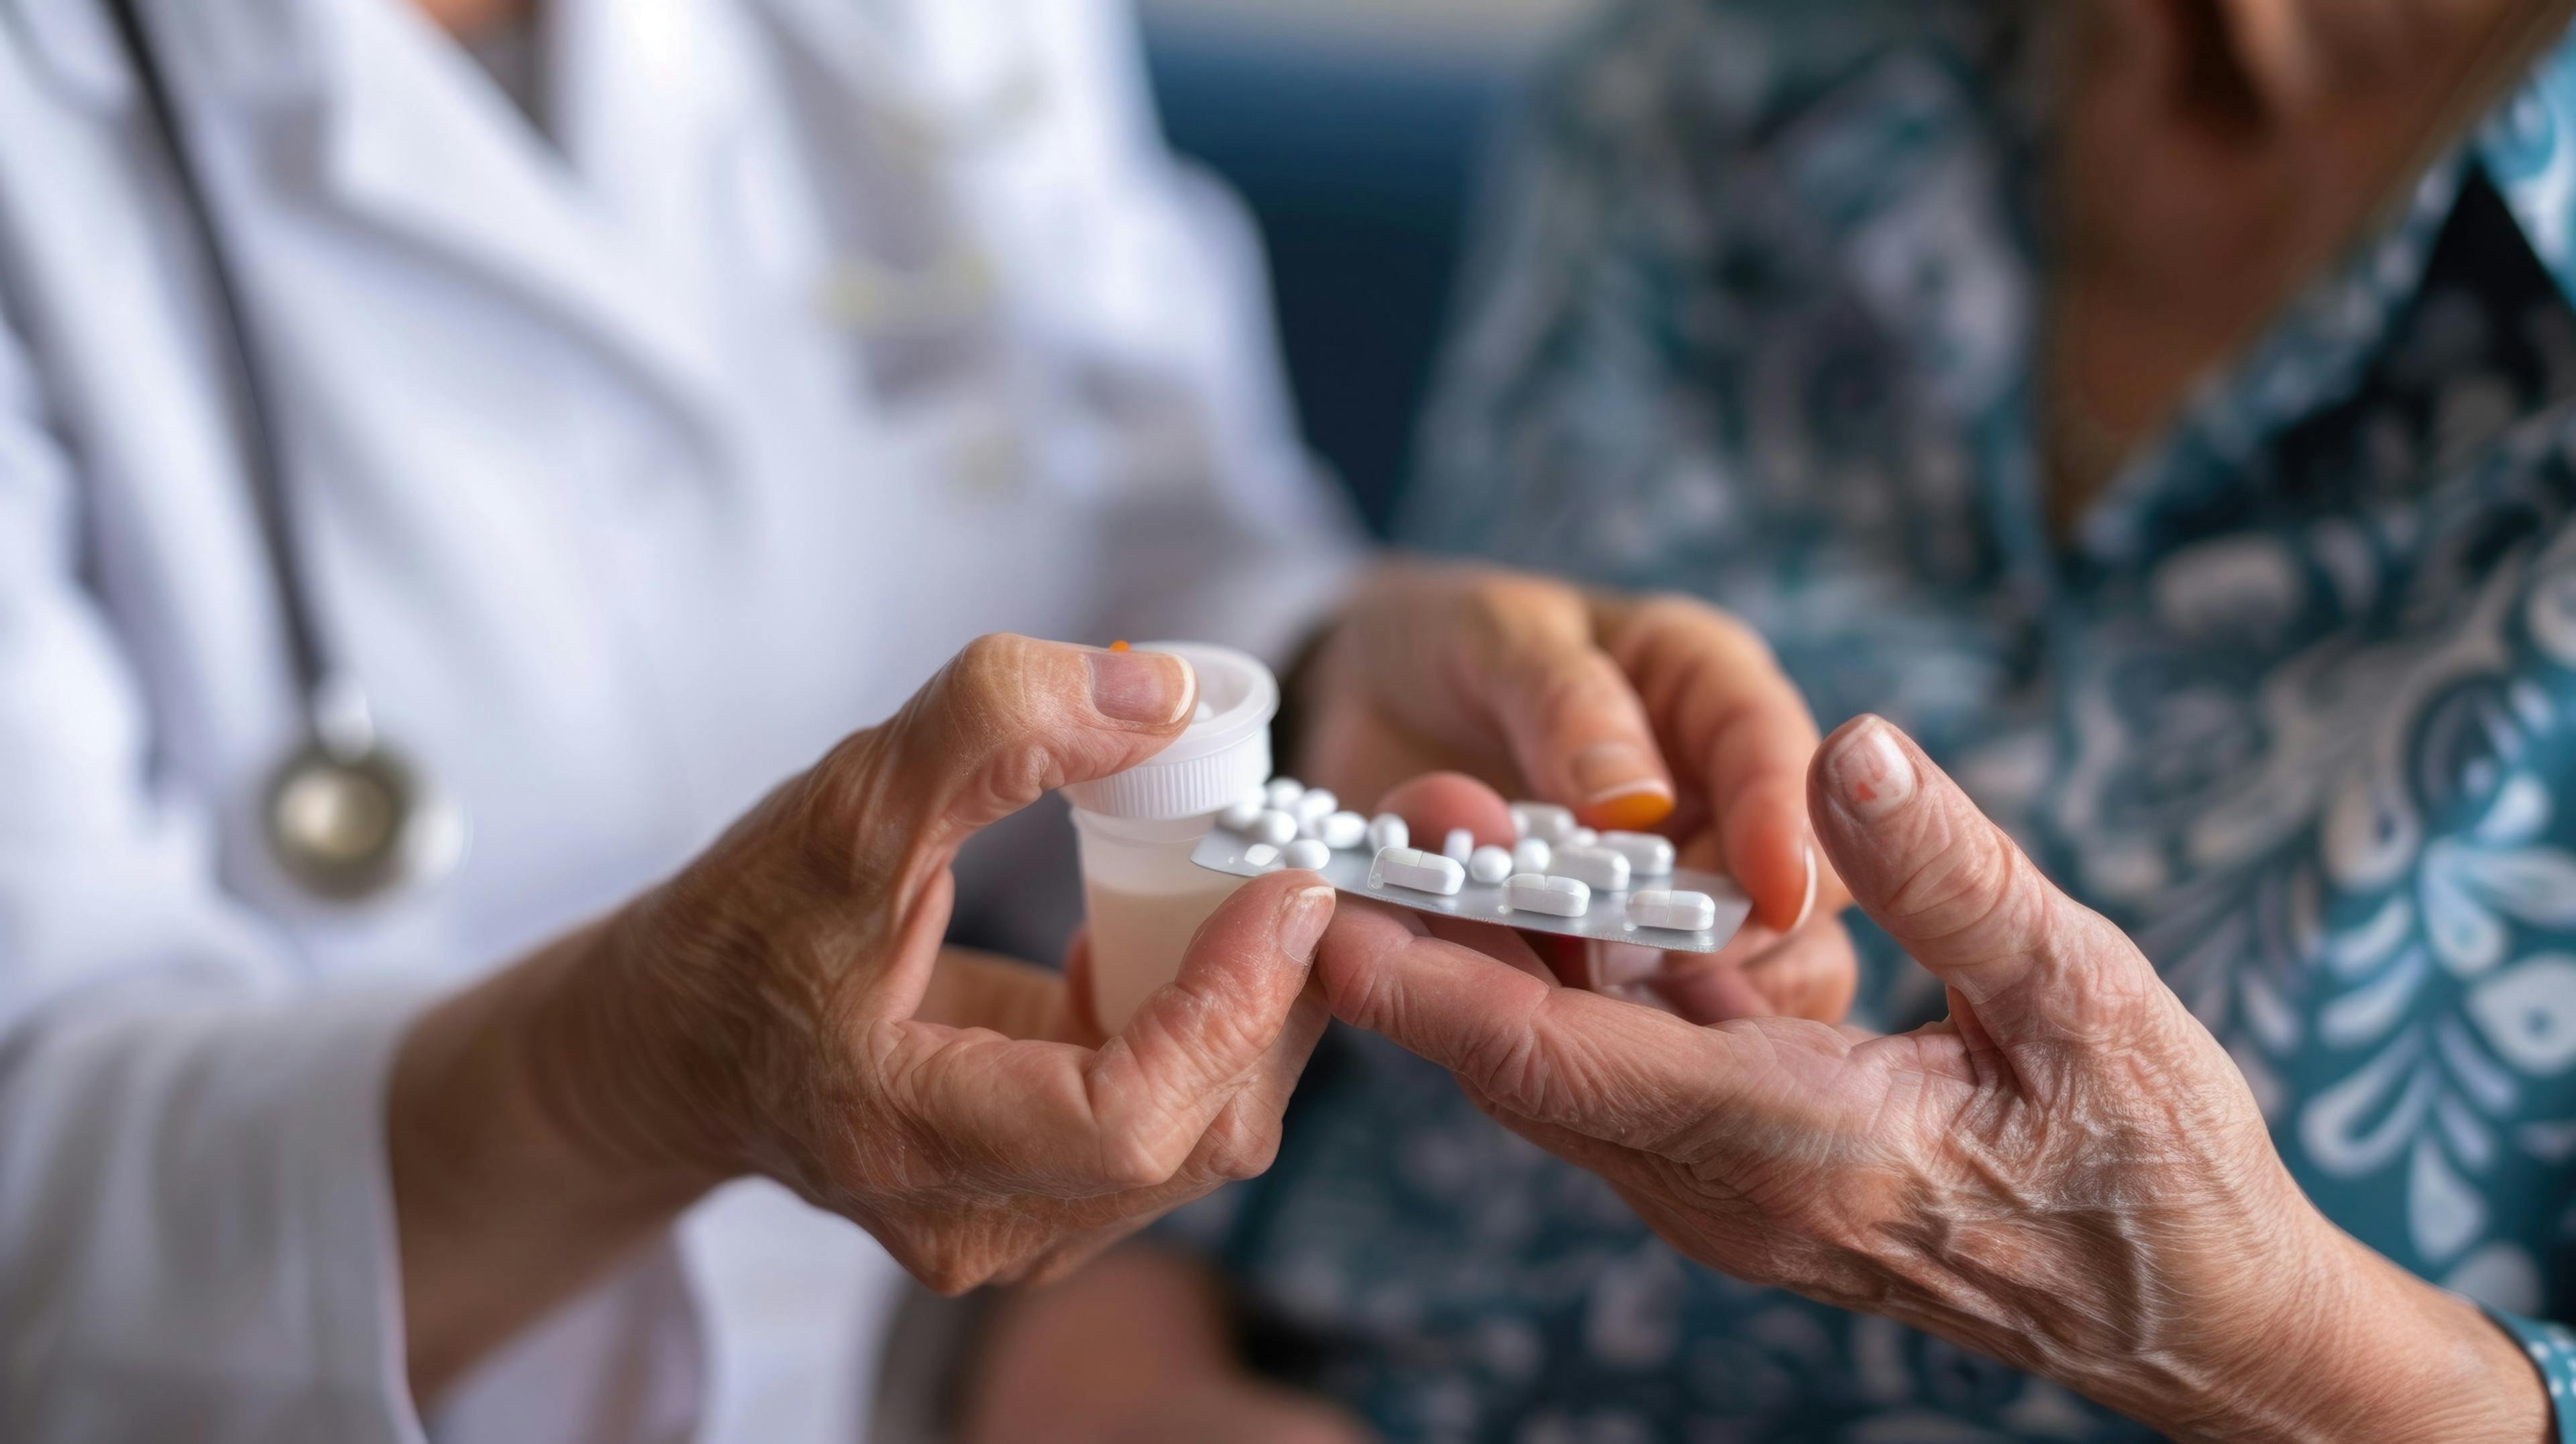 A doctor hands over a strip of pills to an elderly patient, ensuring proper medication management - Image credit: sommersby | stock.adobe.com